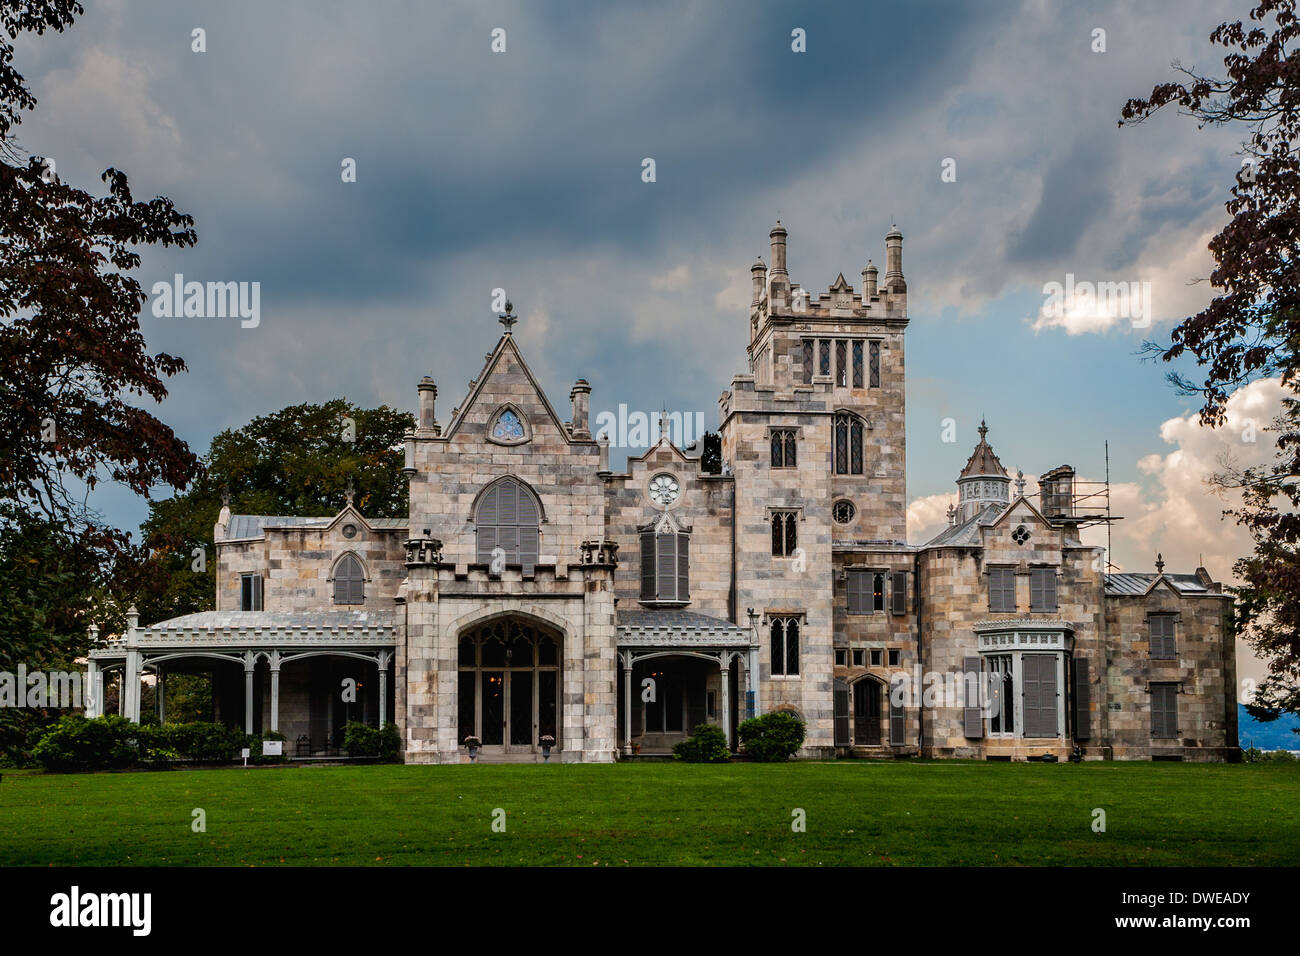 Lyndhurst on Hudson River, finest gothic castle in USA, built for Jay Gould, Tarrytown, Westchester County, New York State. Stock Photo